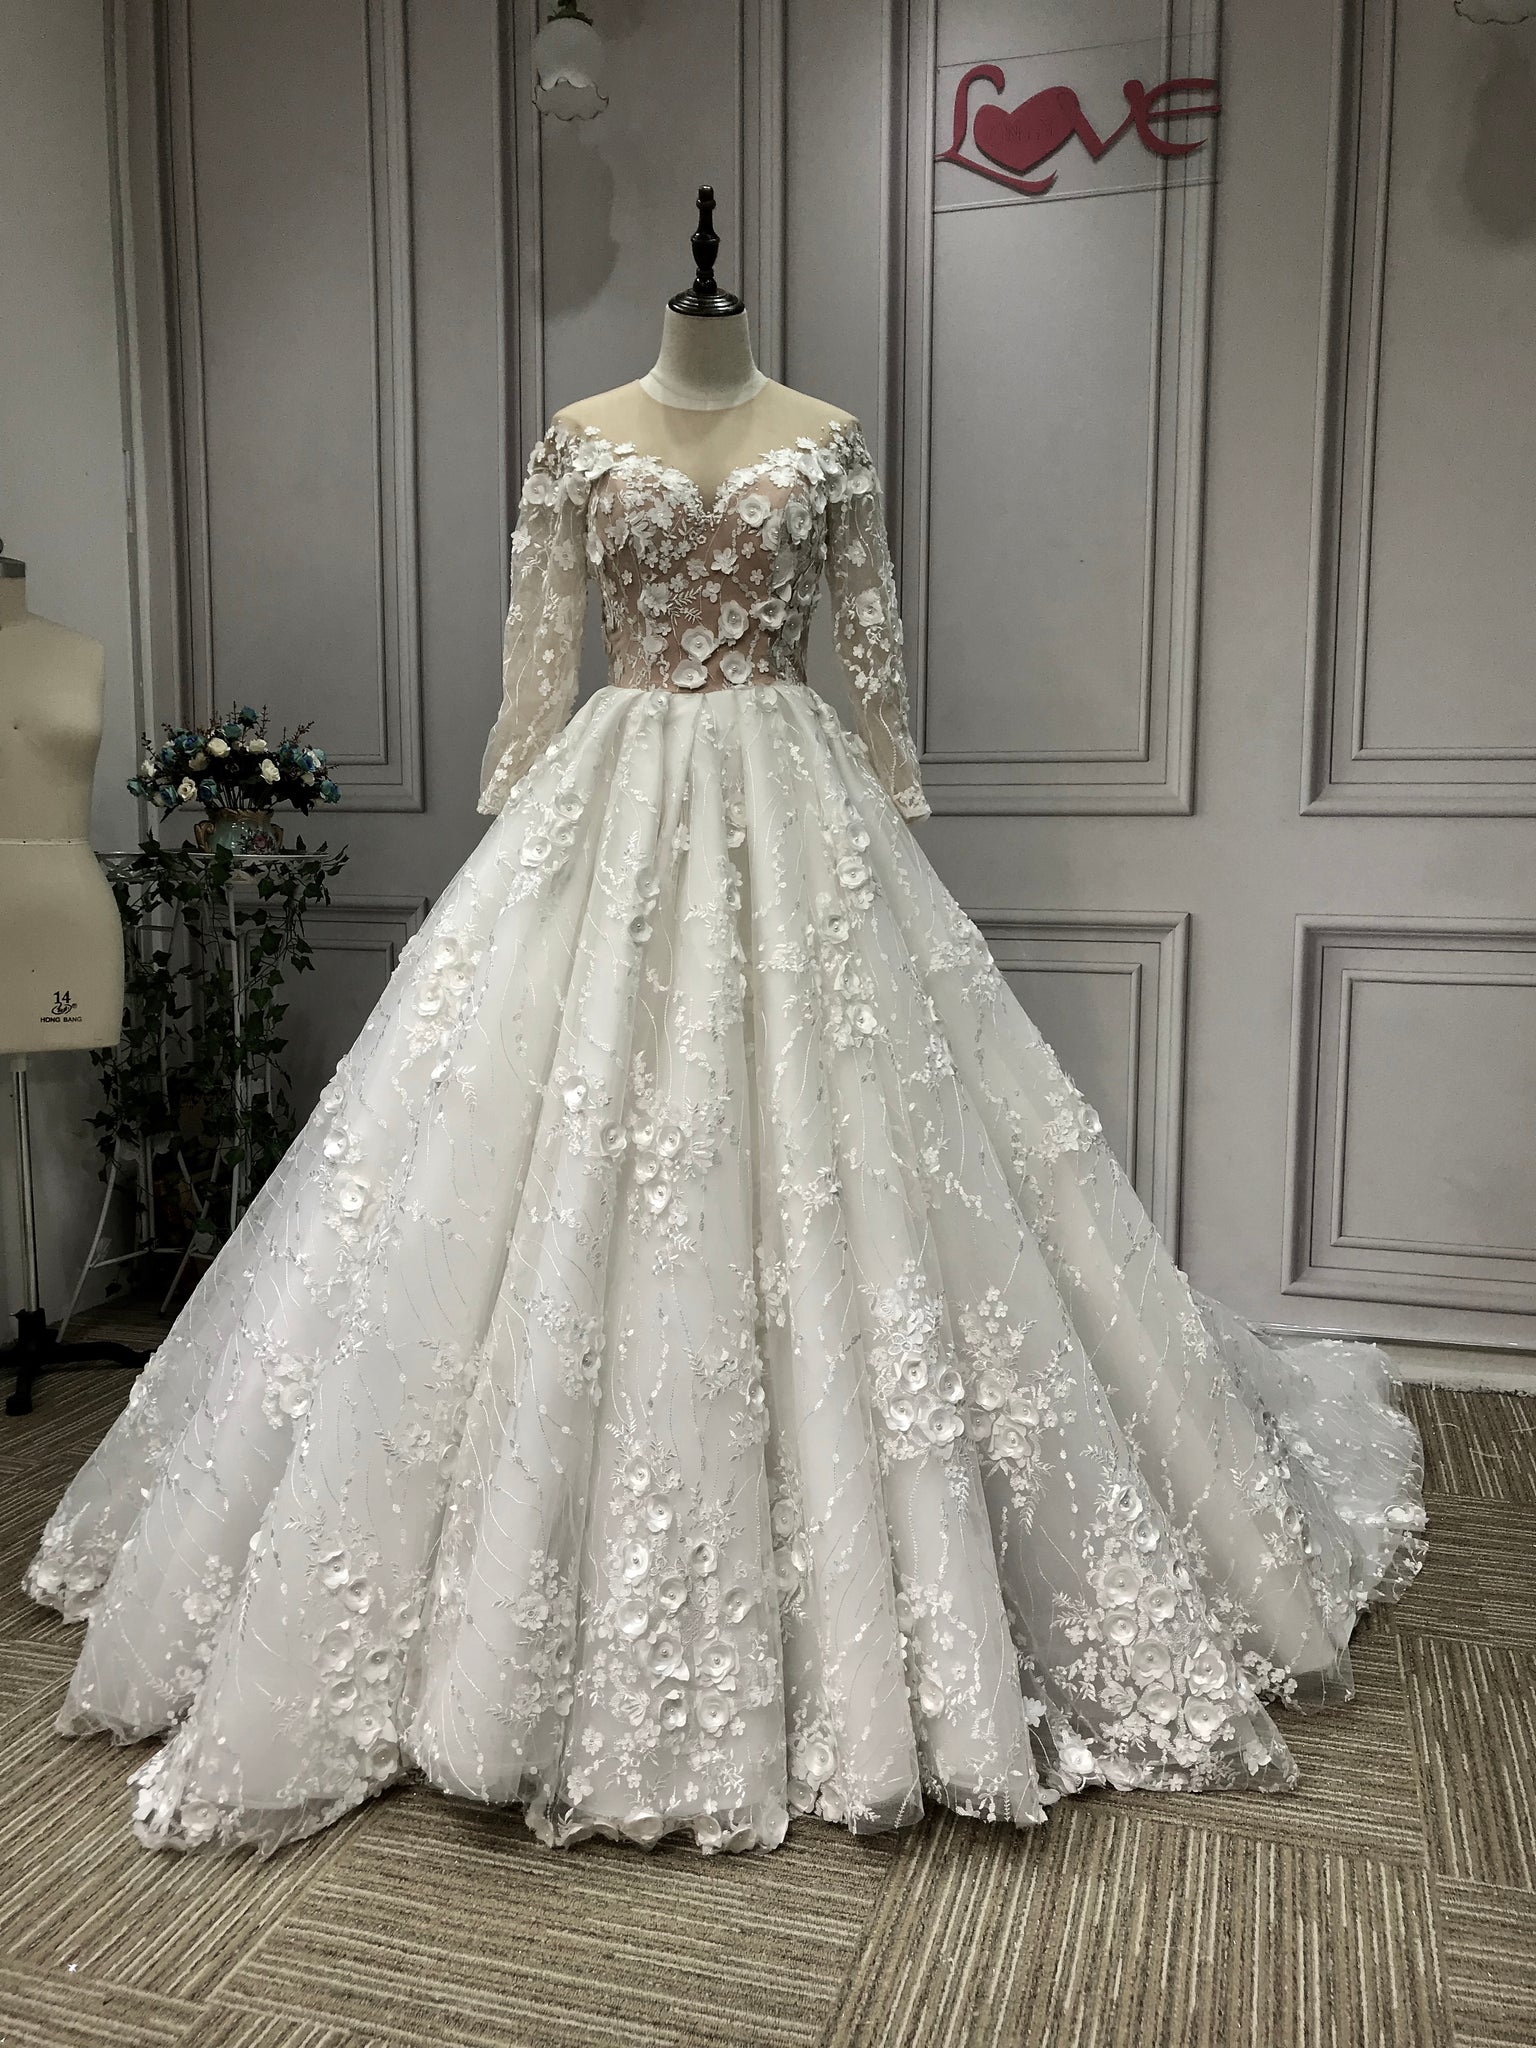 White Off the Shoulder Ball Gown Celebrity wedding Dress with Long Sleeves